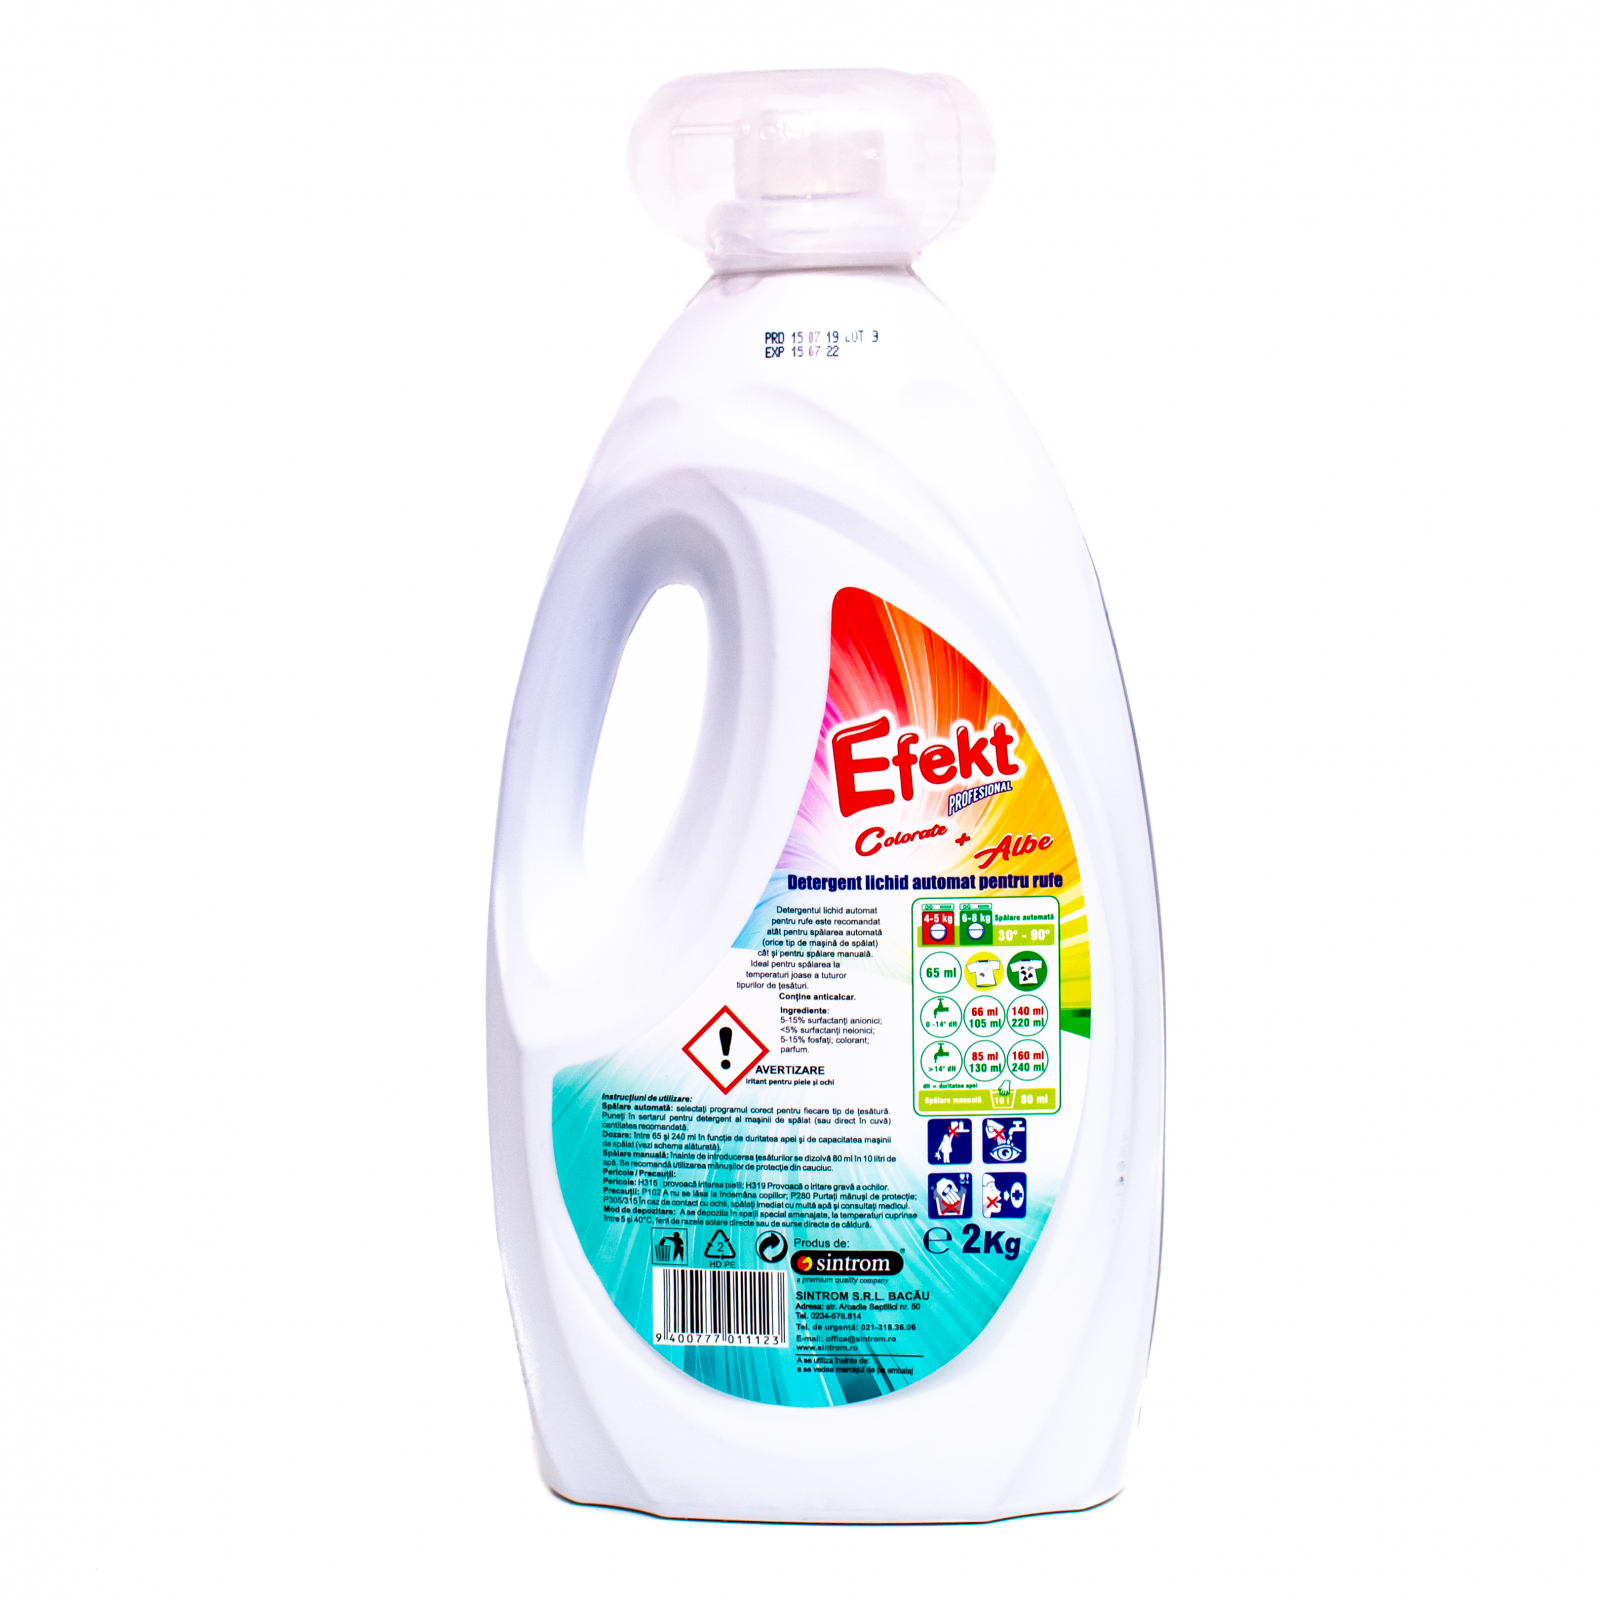 And so on Out of breath chapter Detergent Lichid pentru rufe, Efekt, 2kg, 30 spalari